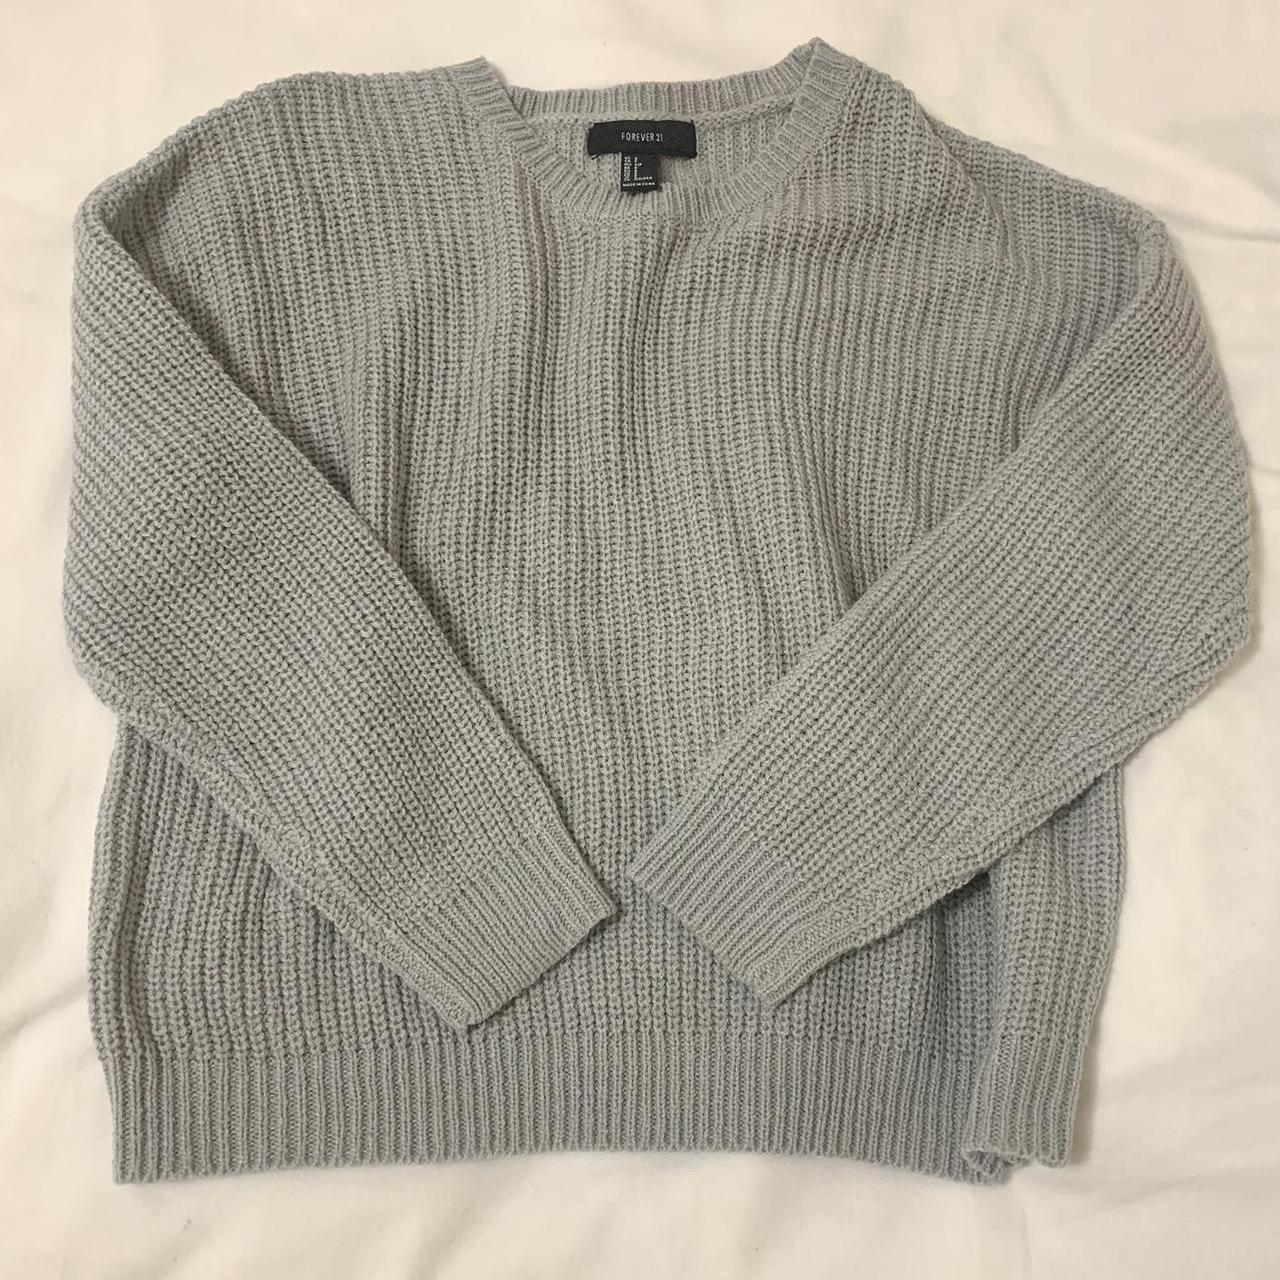 Knitted gray sweater (oversized) from Forever21 -... - Depop